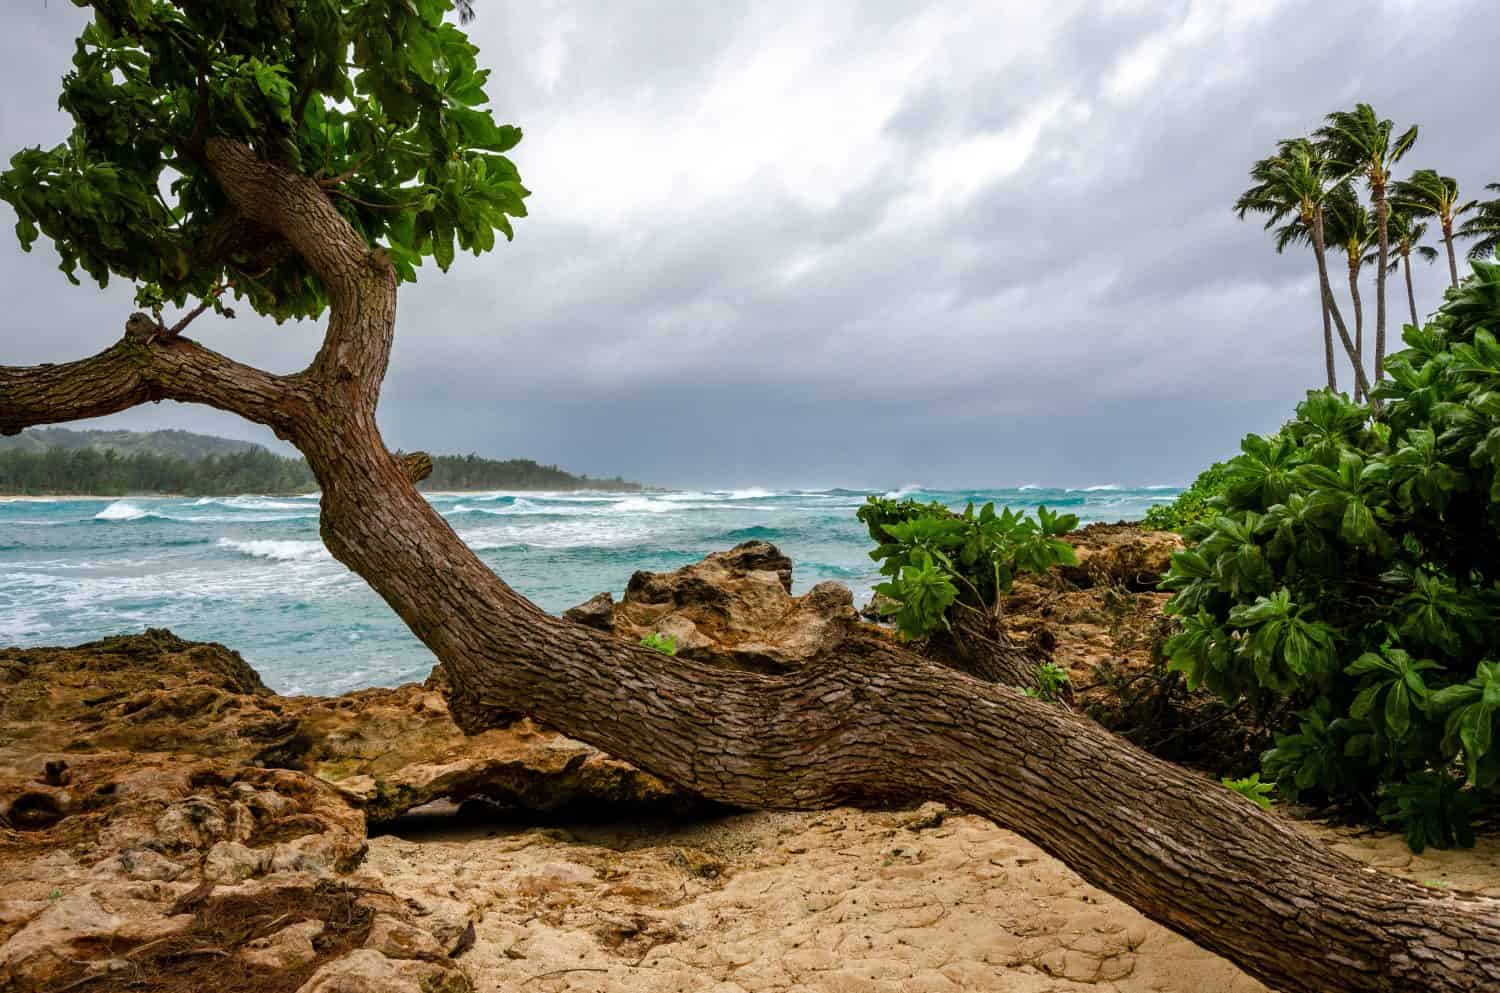 Kawela Bay on North Shore of Hawaii. Blue water with stormy skies and surf. Palm and other exotic trees lining a sandy and rocky beach.